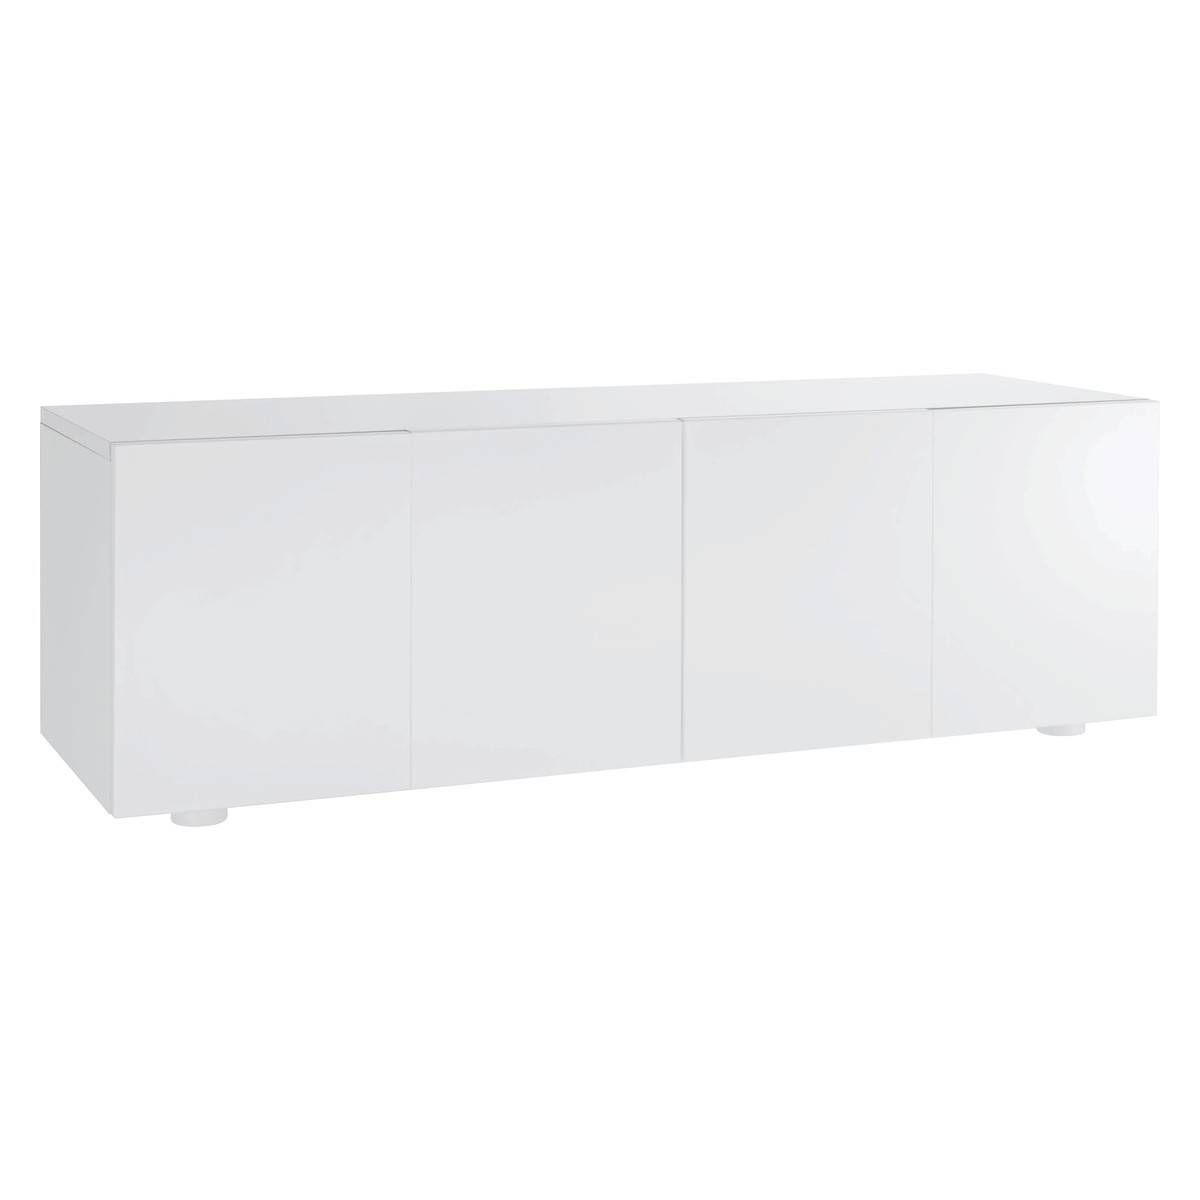 Aspen White High Gloss Long Cabinet | Buy Now At Habitat Uk Within Cheap White High Gloss Sideboard (View 9 of 20)